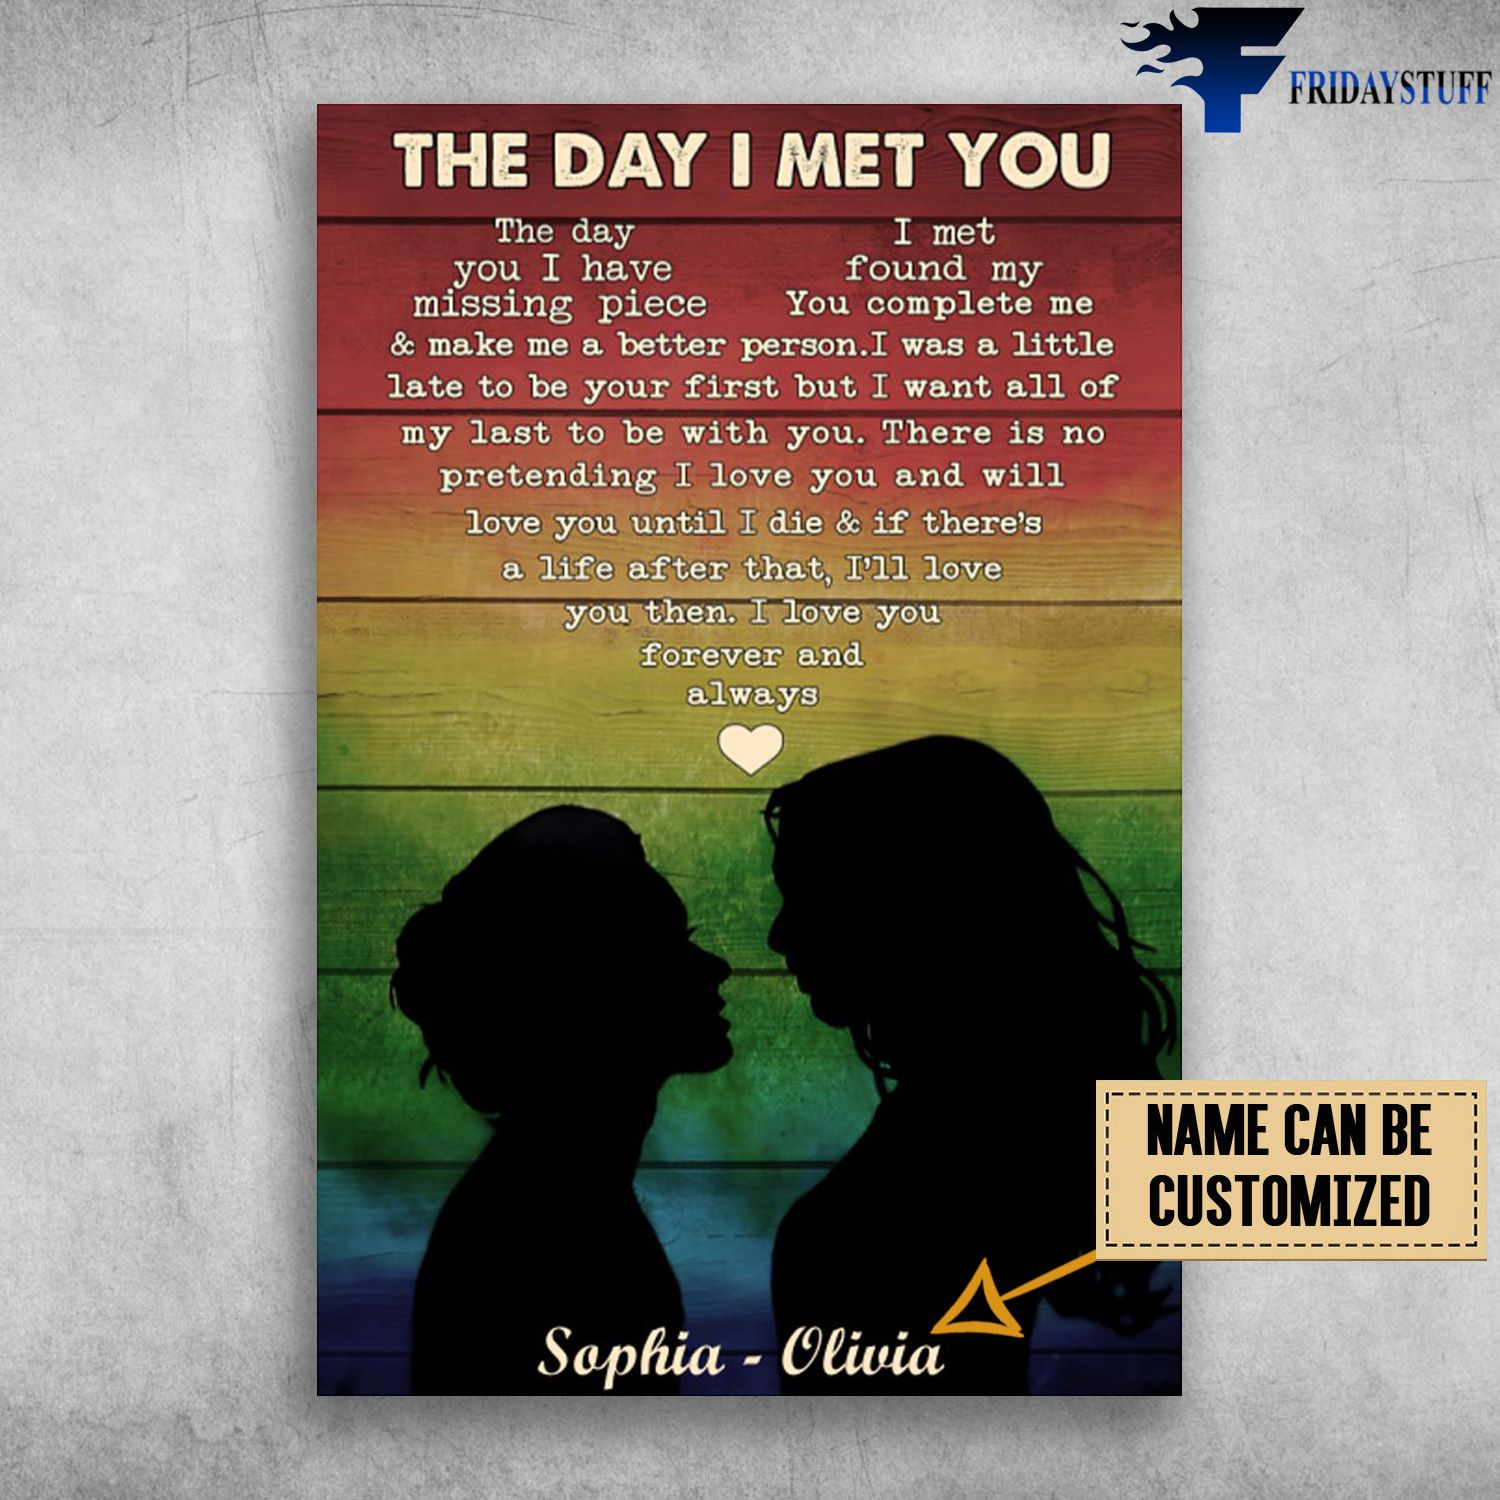 Lesbian Couple - The Day I Met You, I Found My Missing Piece, You Complete Me And Make Me A Better Person, I Was A Little Late To Be Your First, But I Want All Of My Last To Be With You